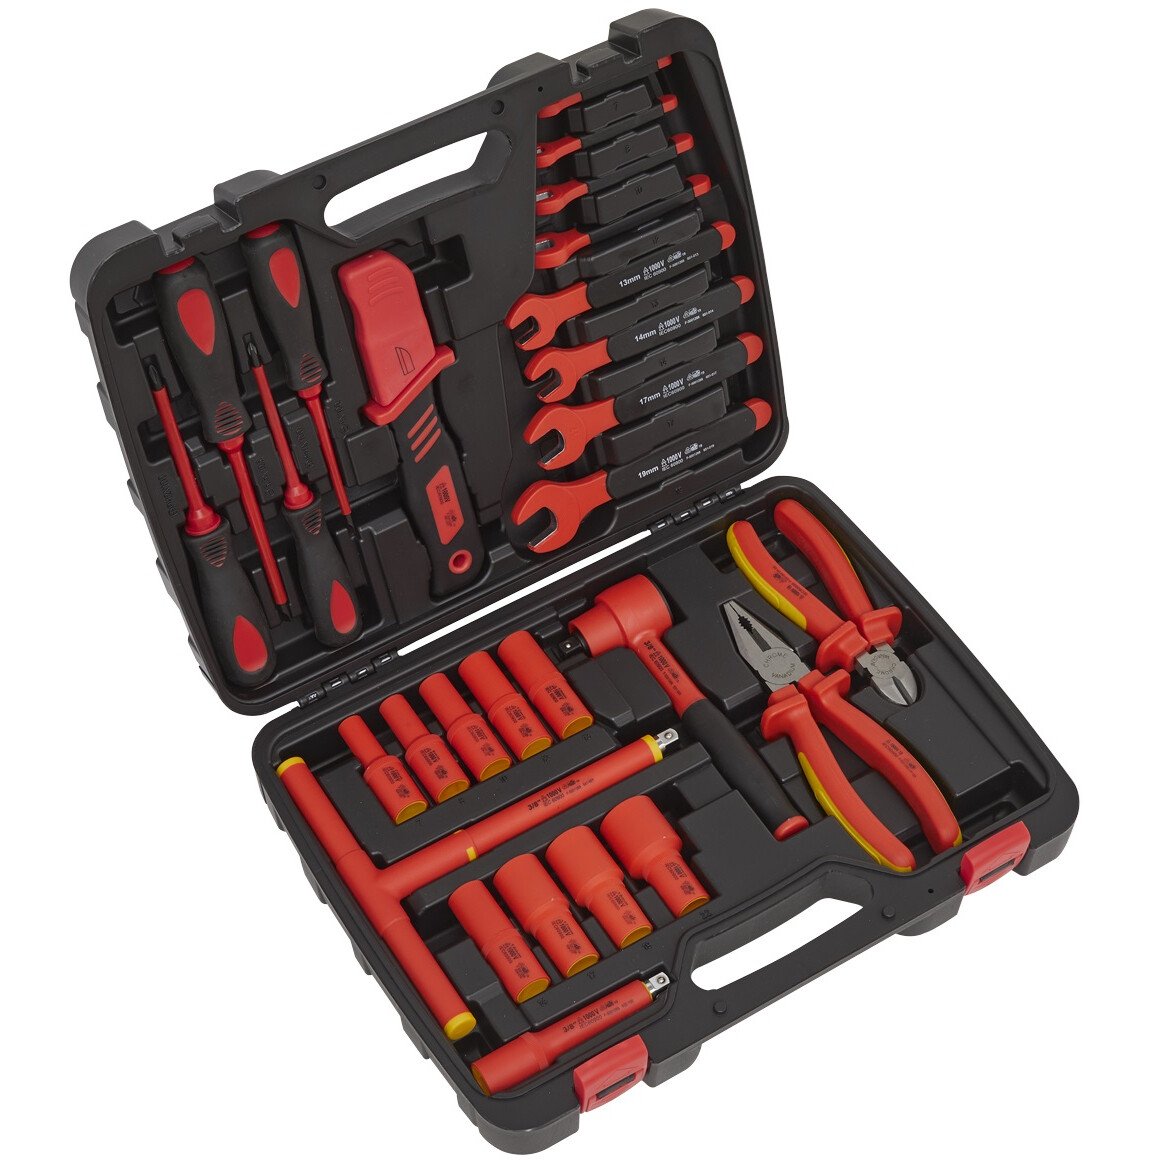 Sealey AK7945 1000V Insulated Tool Kit 27 Piece VDE Approved